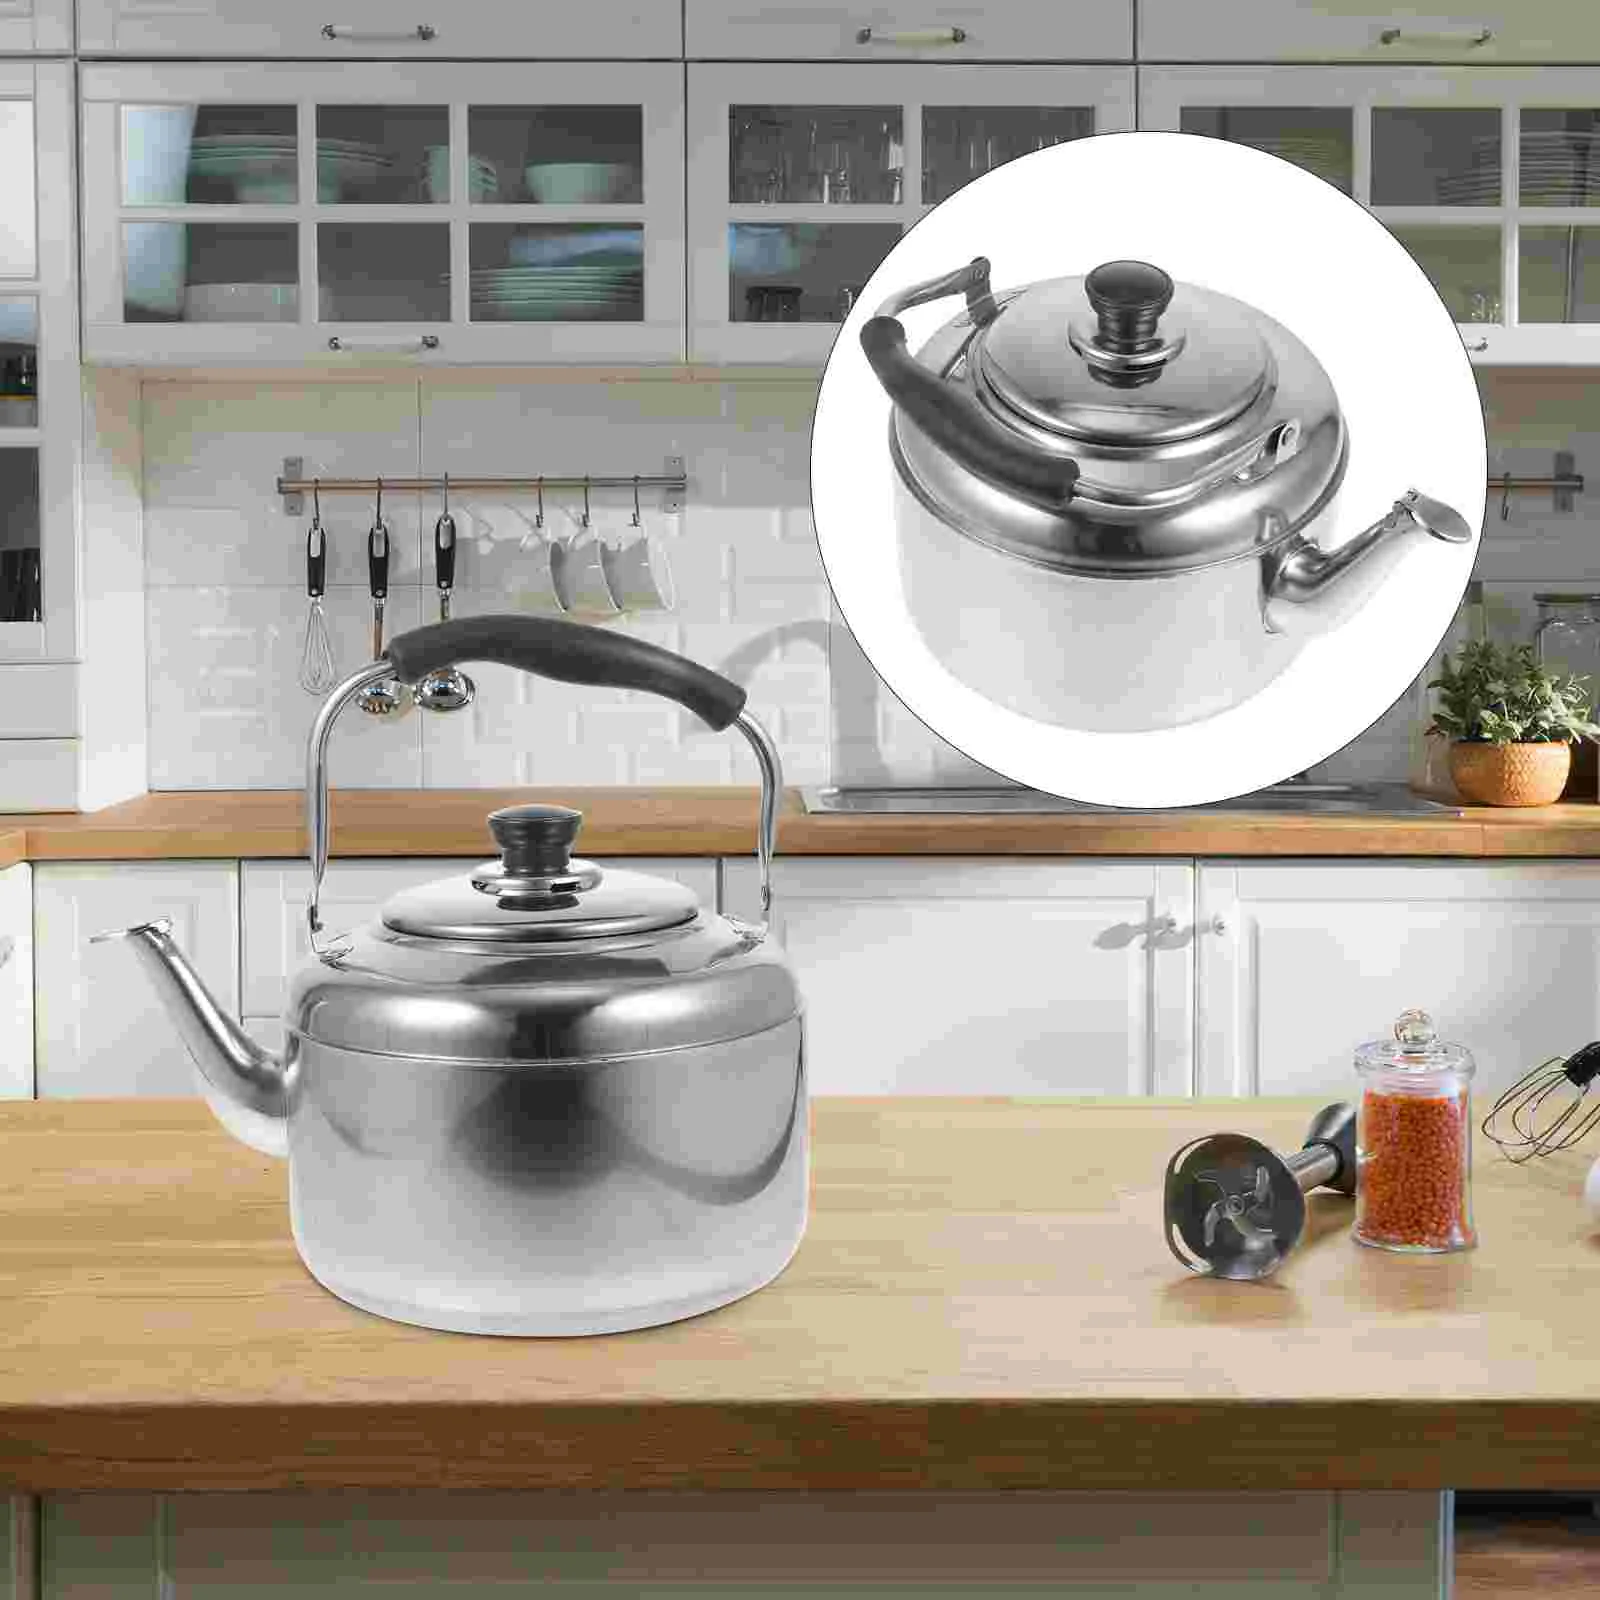 

Kettle Tea Whistling Teapot Water Stovetop Steel Stainless Pot Stove Coffee Boiling Gas Kettles Hot Sounding Metal Electric